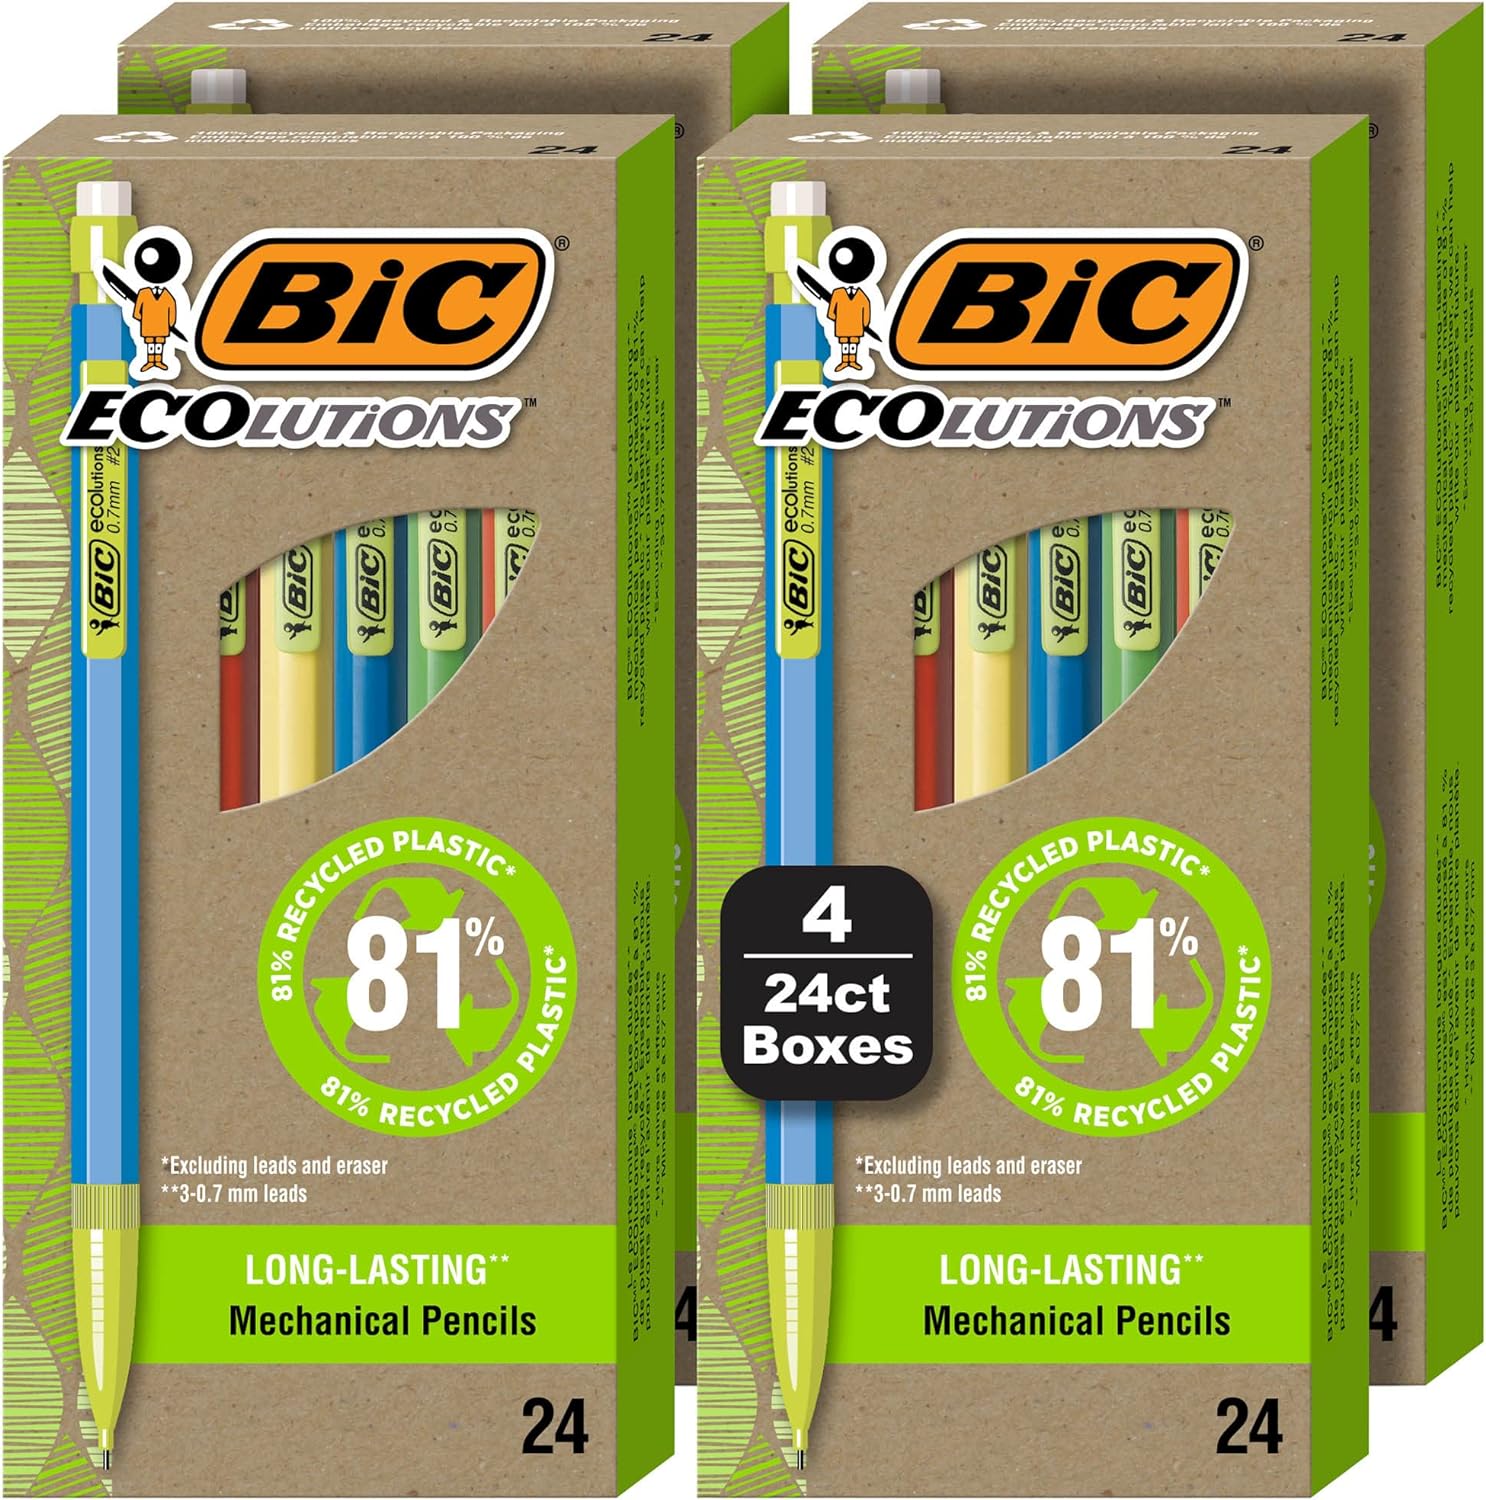 BIC Ecolutions Mechanical Pencils with Erasers, With Colorful Barrel, Medium Point (0.7mm), 96-Count Pack, Mechanical Pencils Made from 81% Recycled Plastic Excluding Leads and Erasers